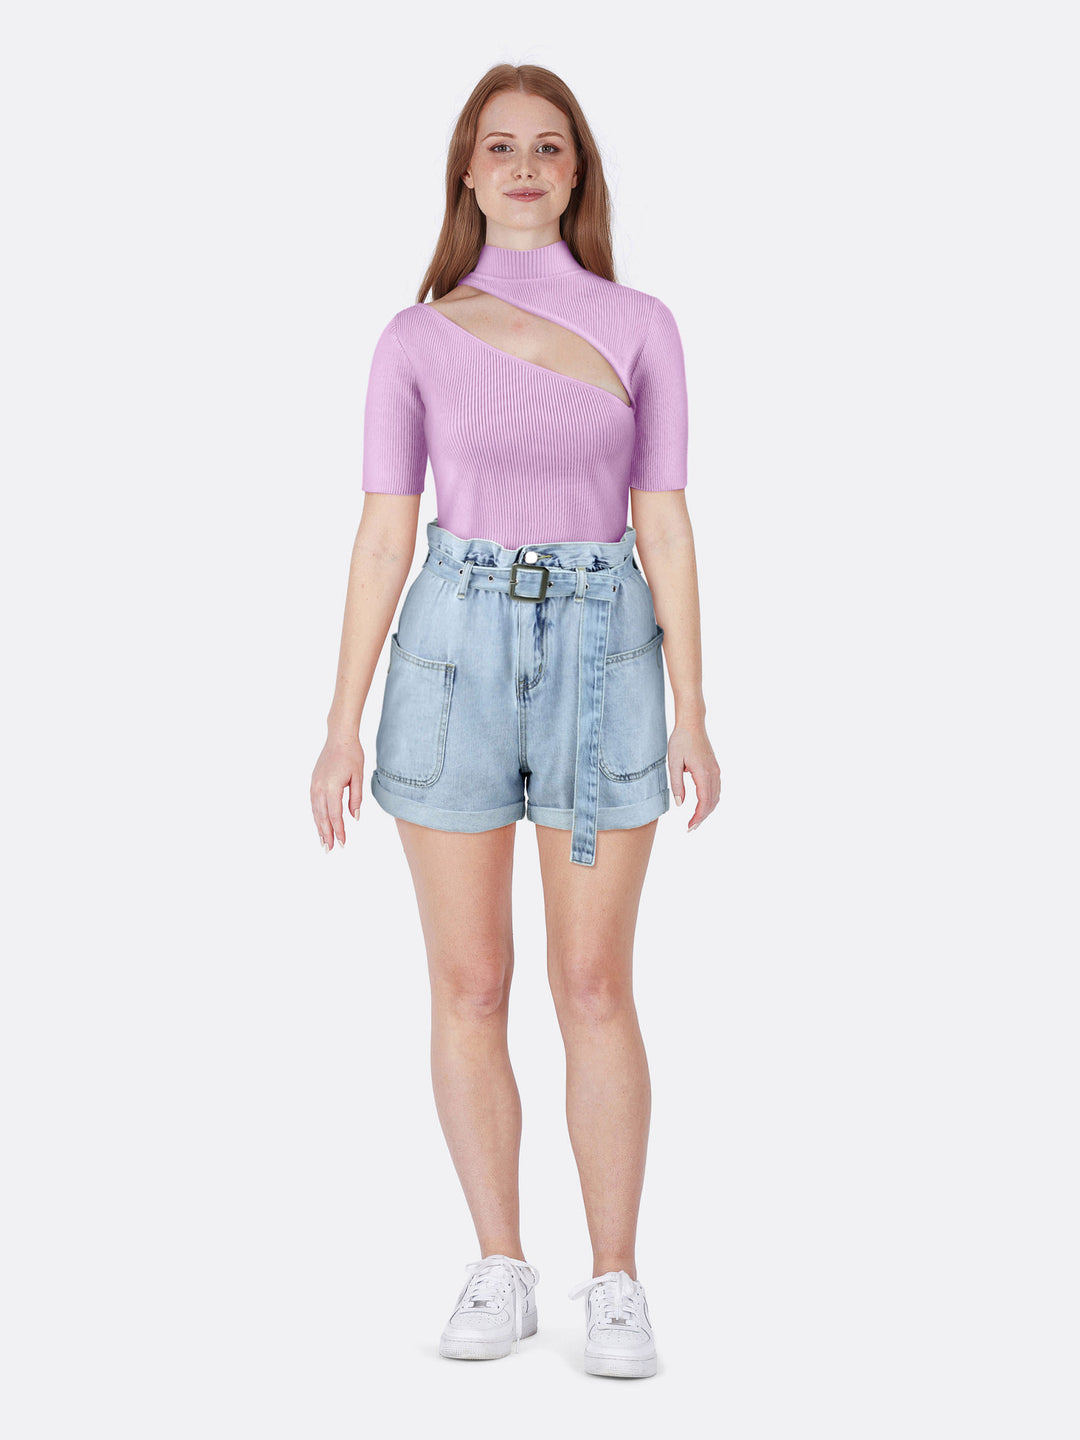 High Neck Short Sleeve Knitted Ribbed Crop Top with Cut Out Pink Front | Jolovies